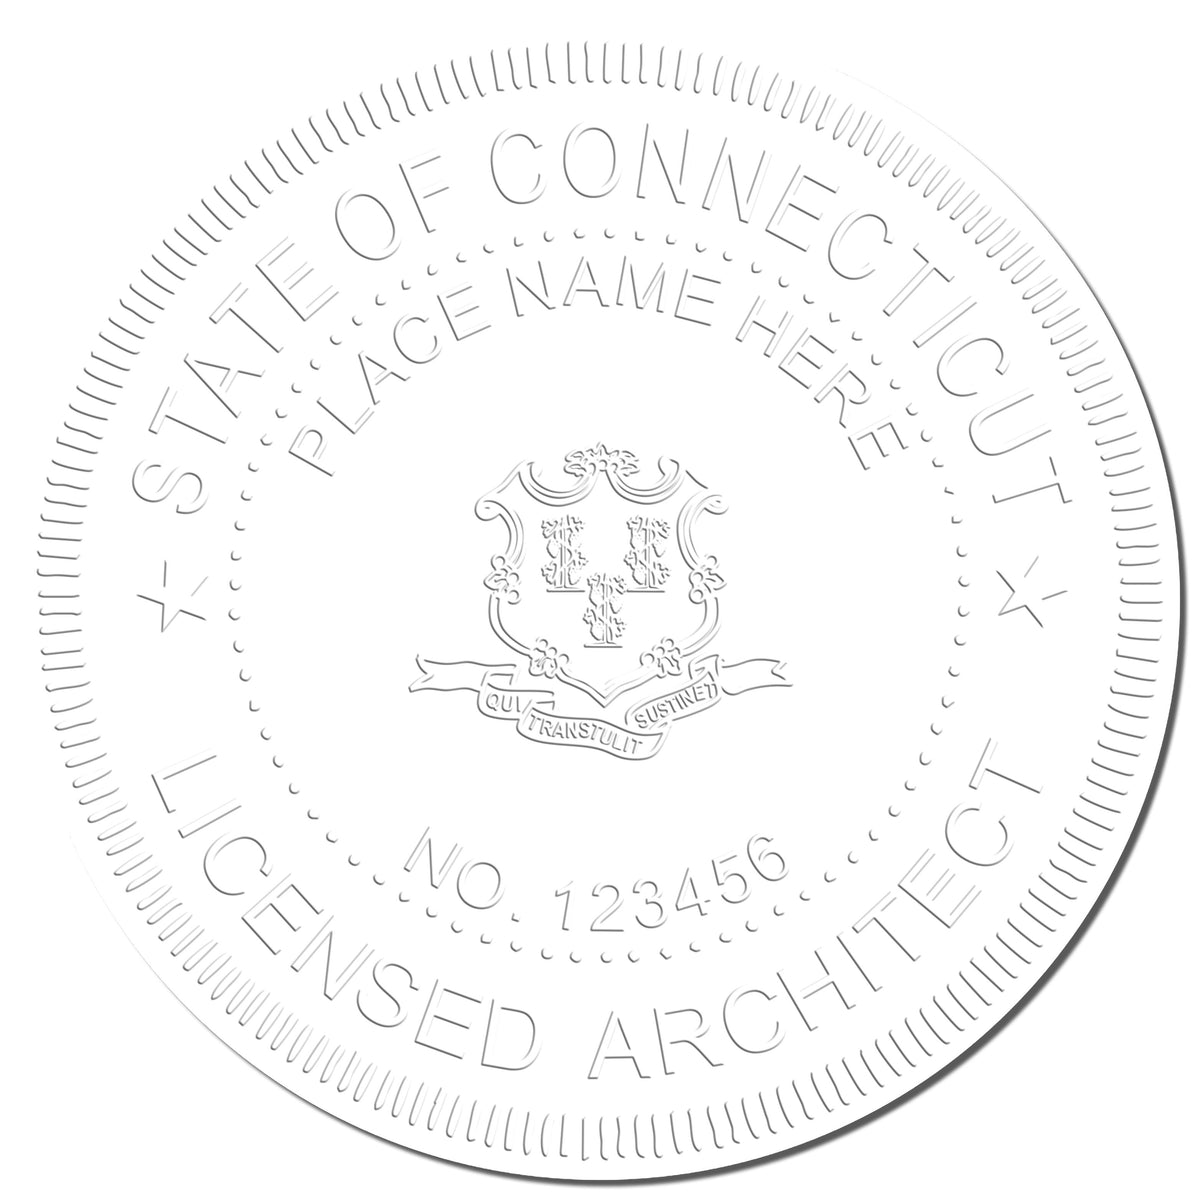 This paper is stamped with a sample imprint of the Hybrid Connecticut Architect Seal, signifying its quality and reliability.